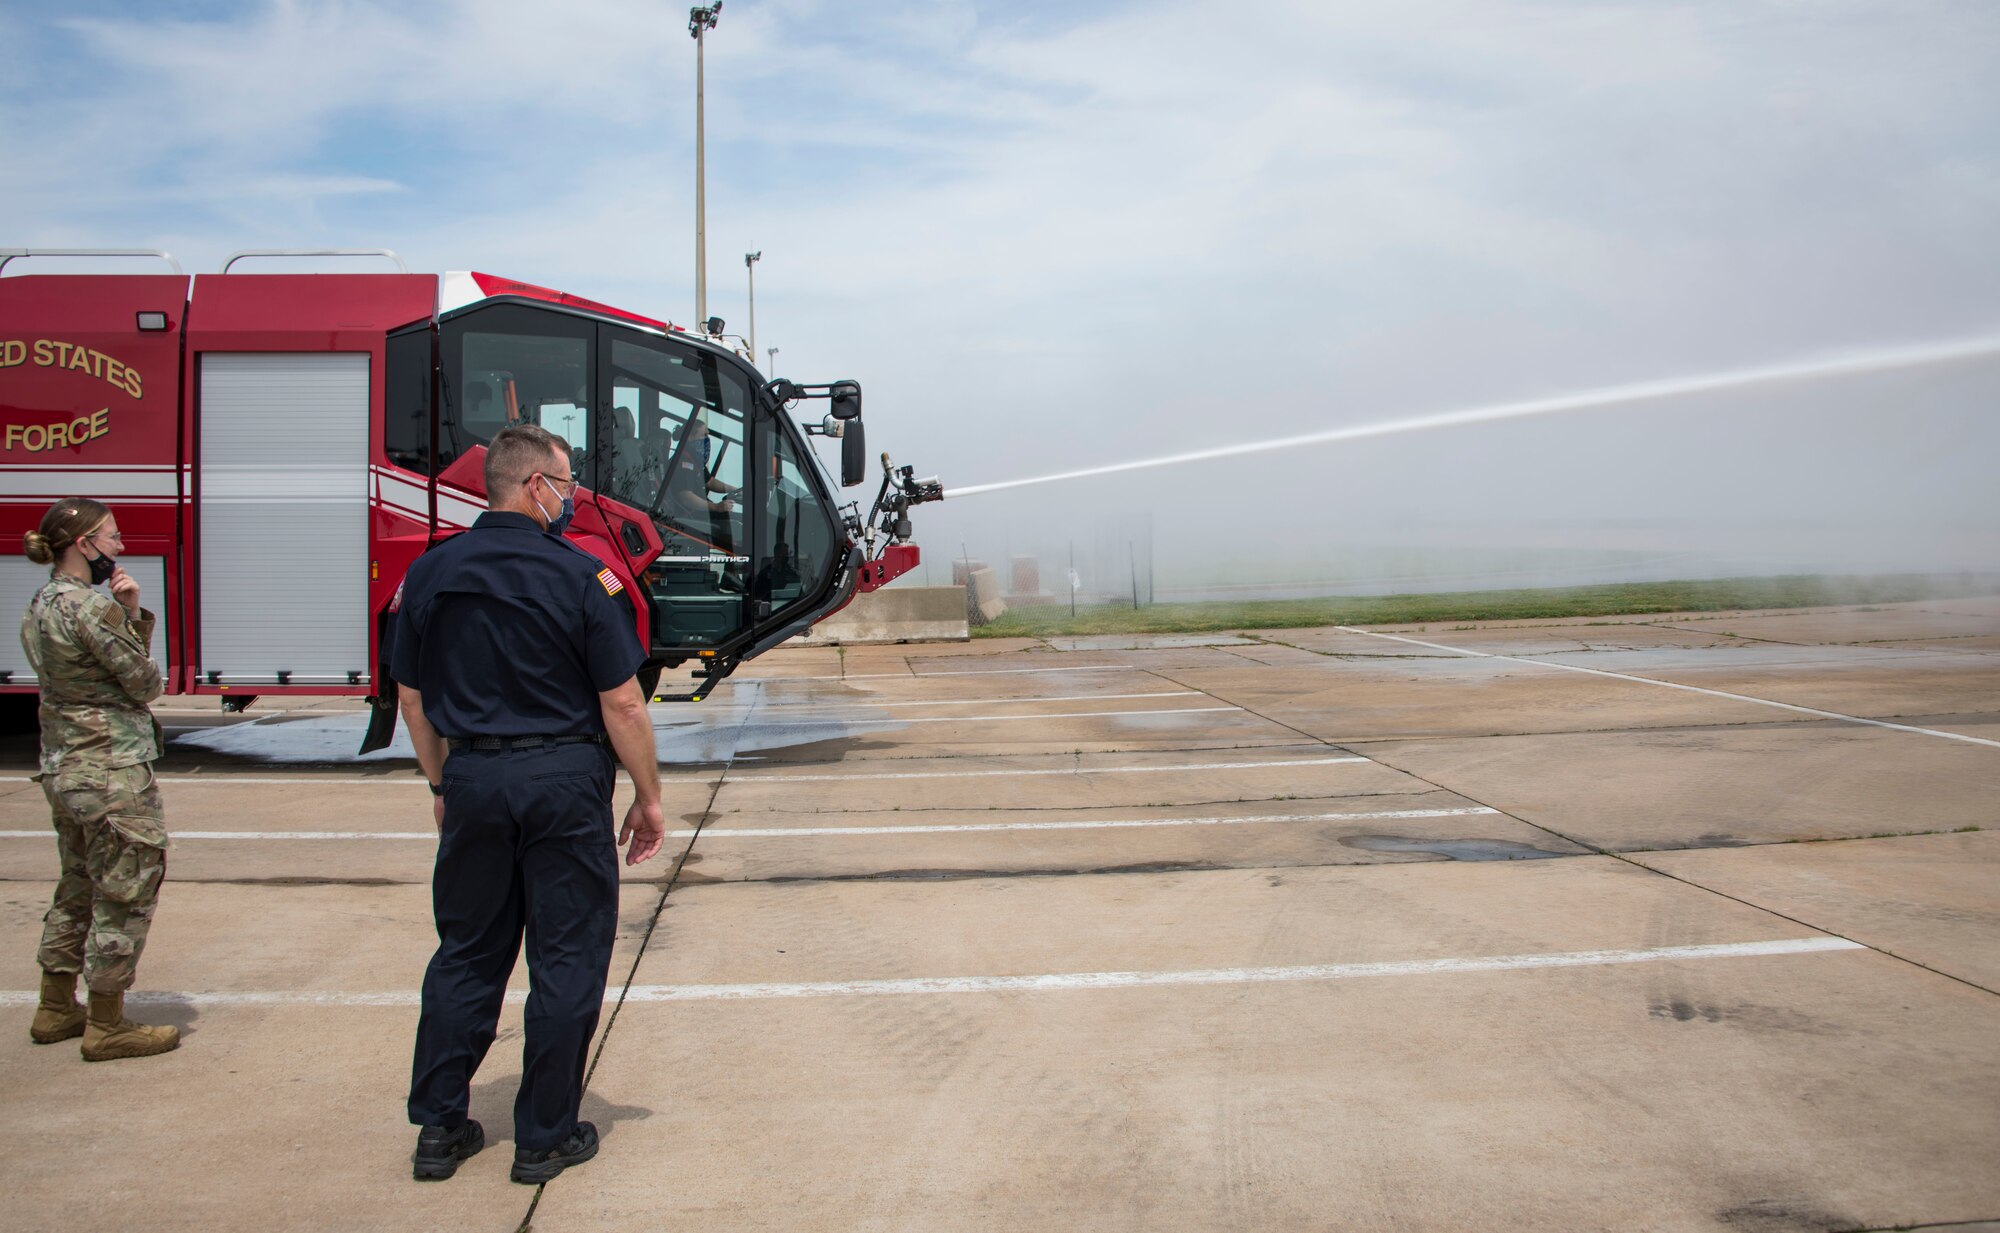 Airmen watch as the new base fire truck sprays water, April 26, 2021, at Altus Air Force Base, Oklahoma. The fire truck can hold up to 3,000 pounds of water. (U.S. Air Force photo by Airman 1st Class Amanda Lovelace)